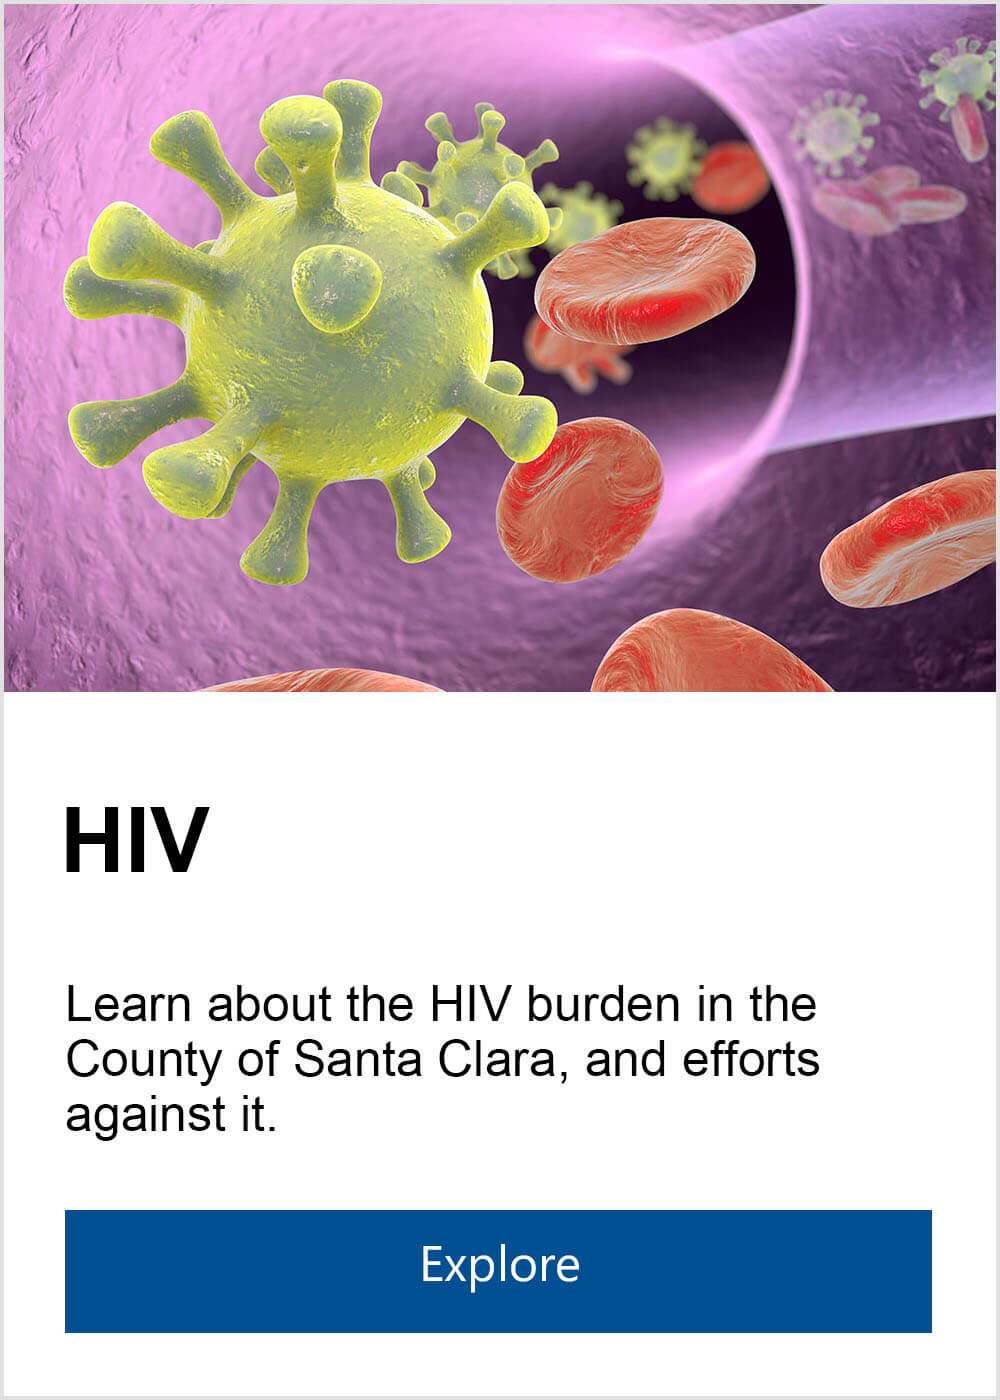 Learn about HIV burden in Santa Clara County and efforts to prevent it